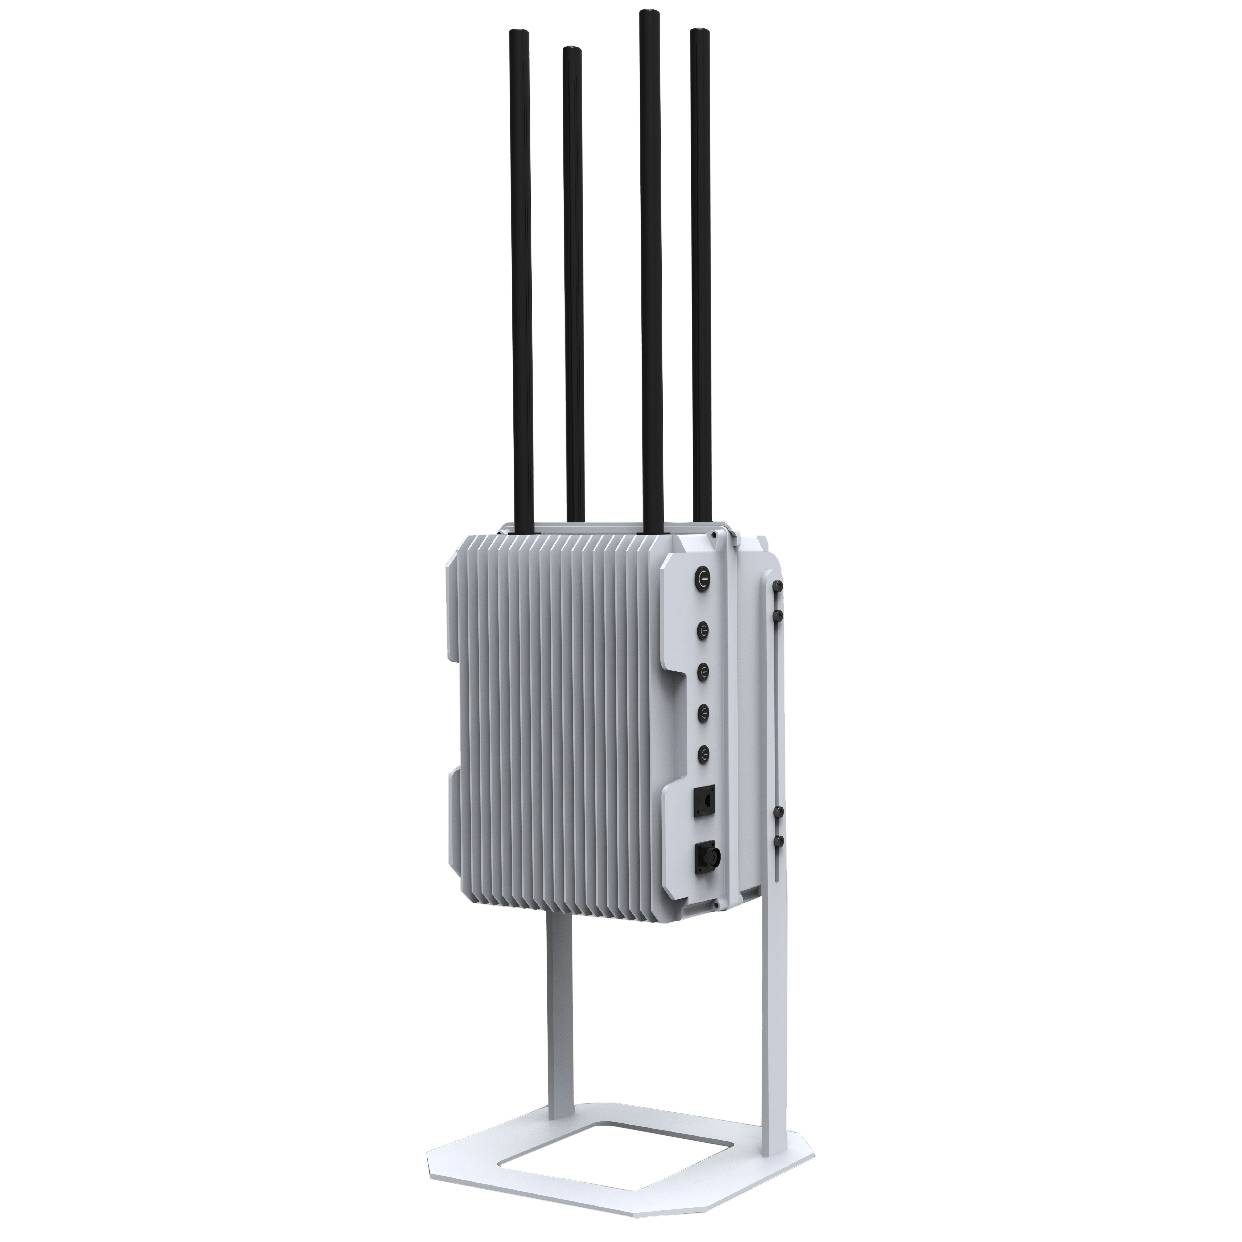 Massive Selection for Through Wall Microphone - Fixed UAV Jammer – Heweiyongtai